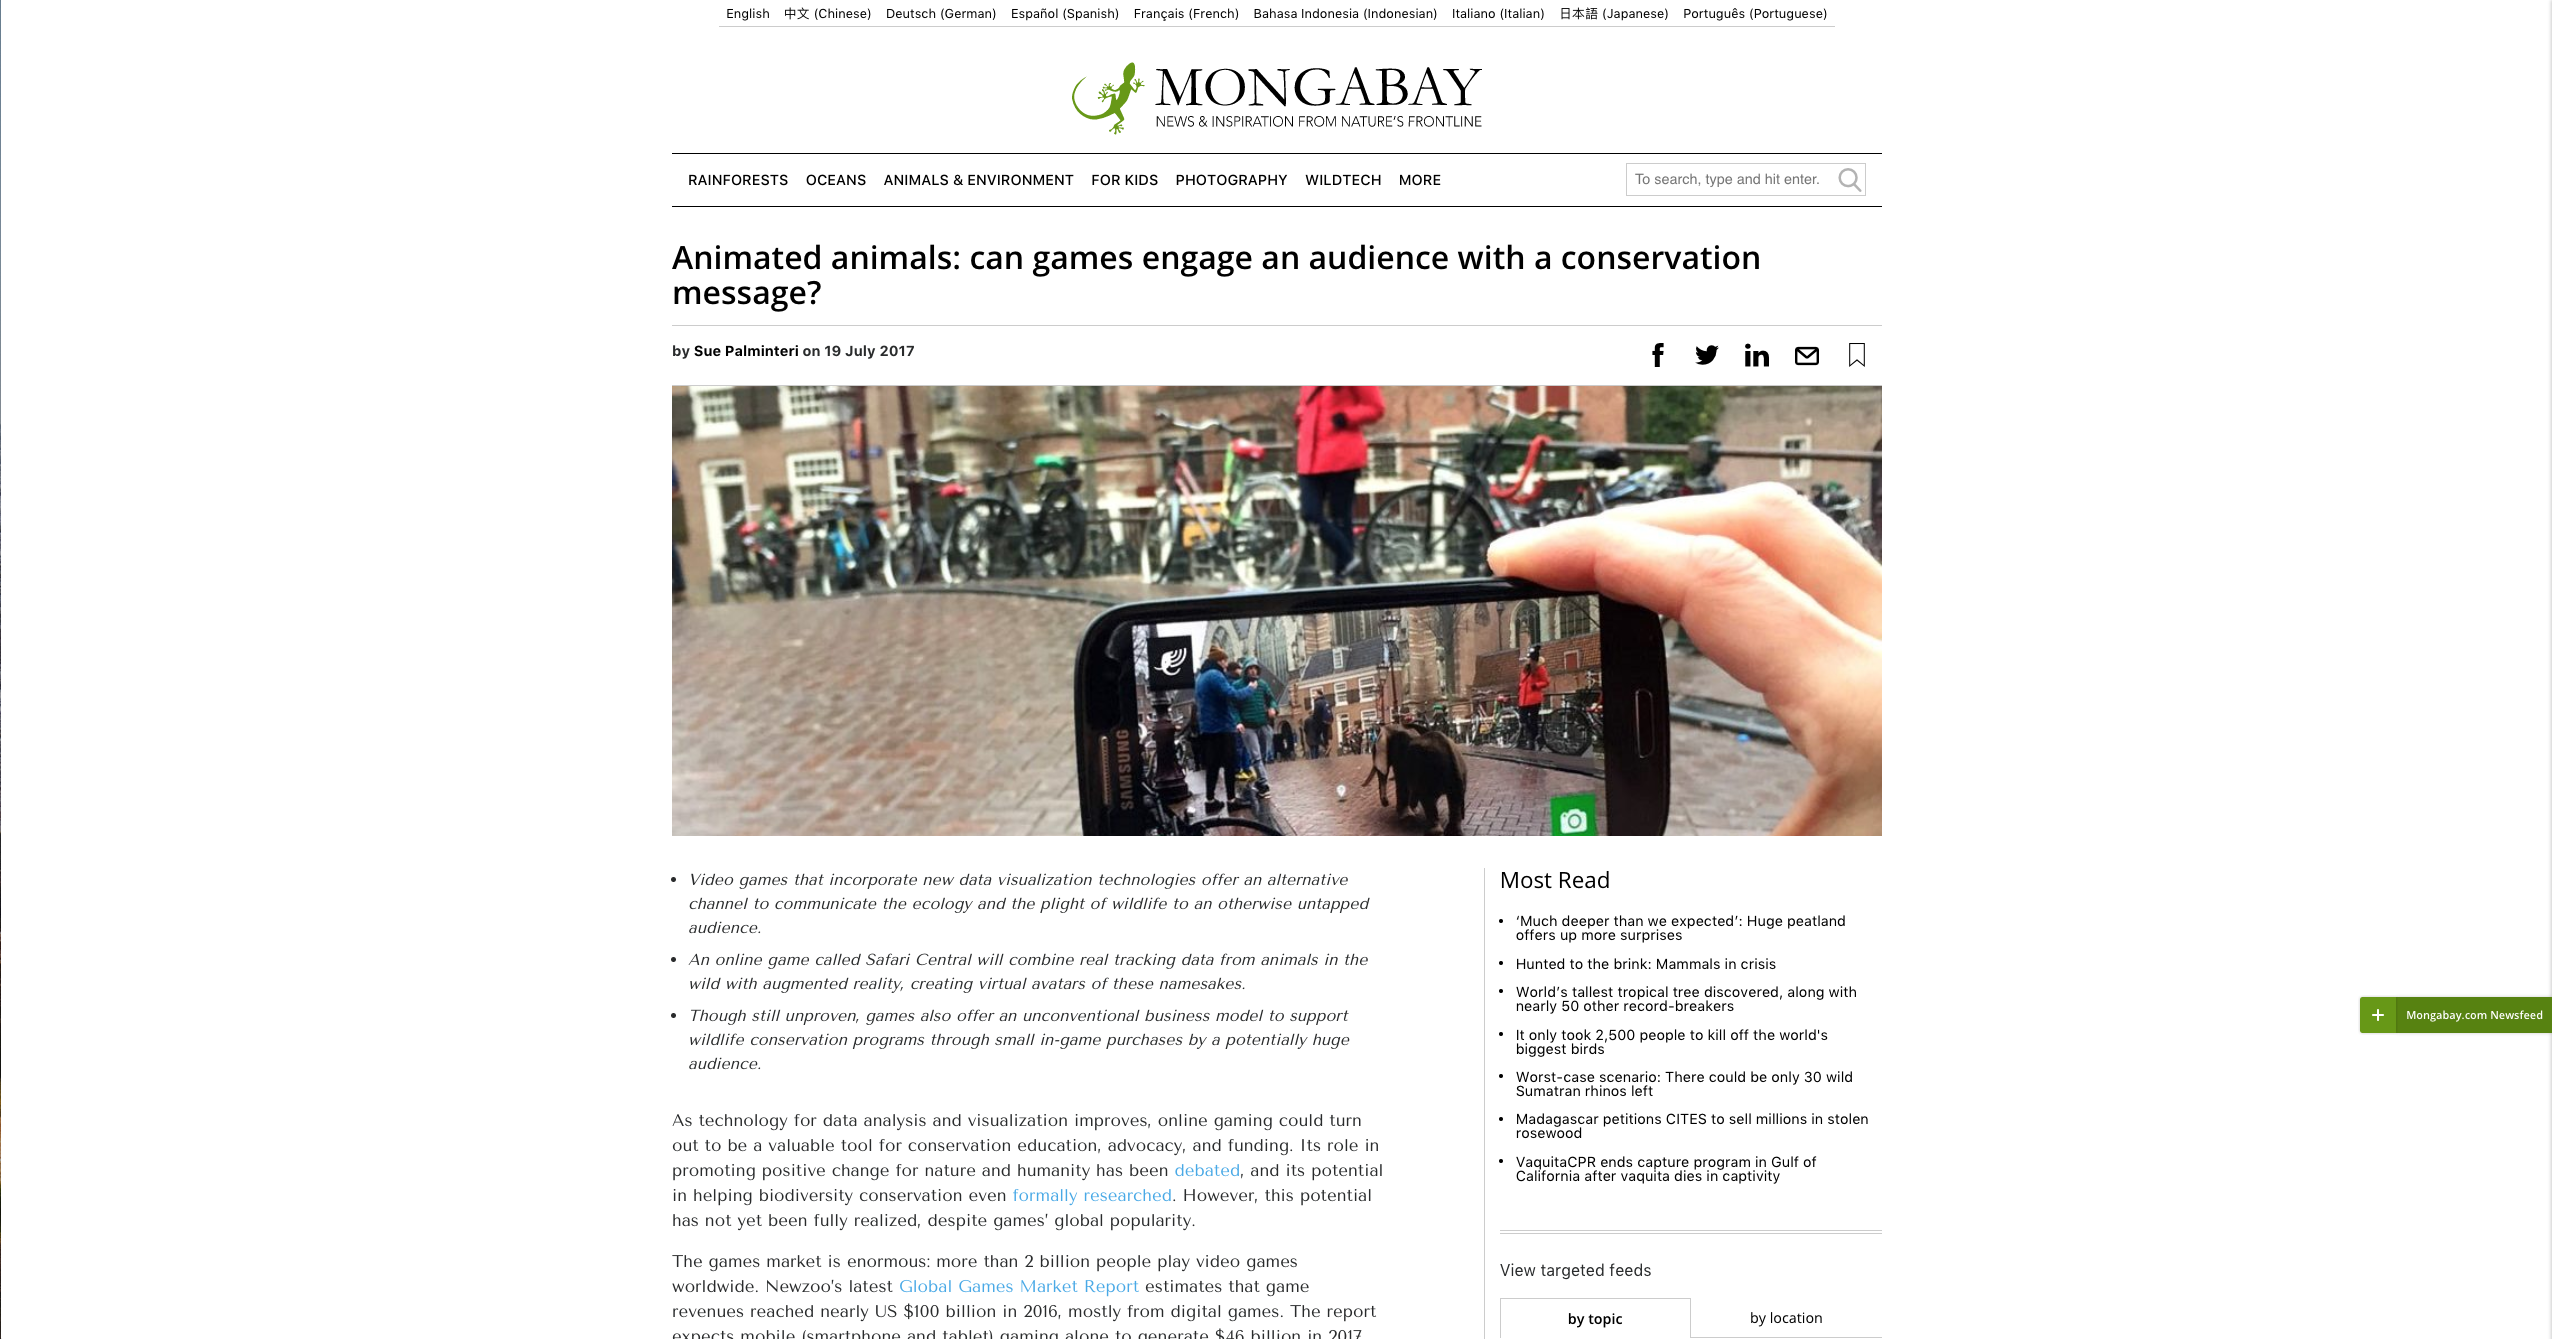 Image for Mongobay publicity item